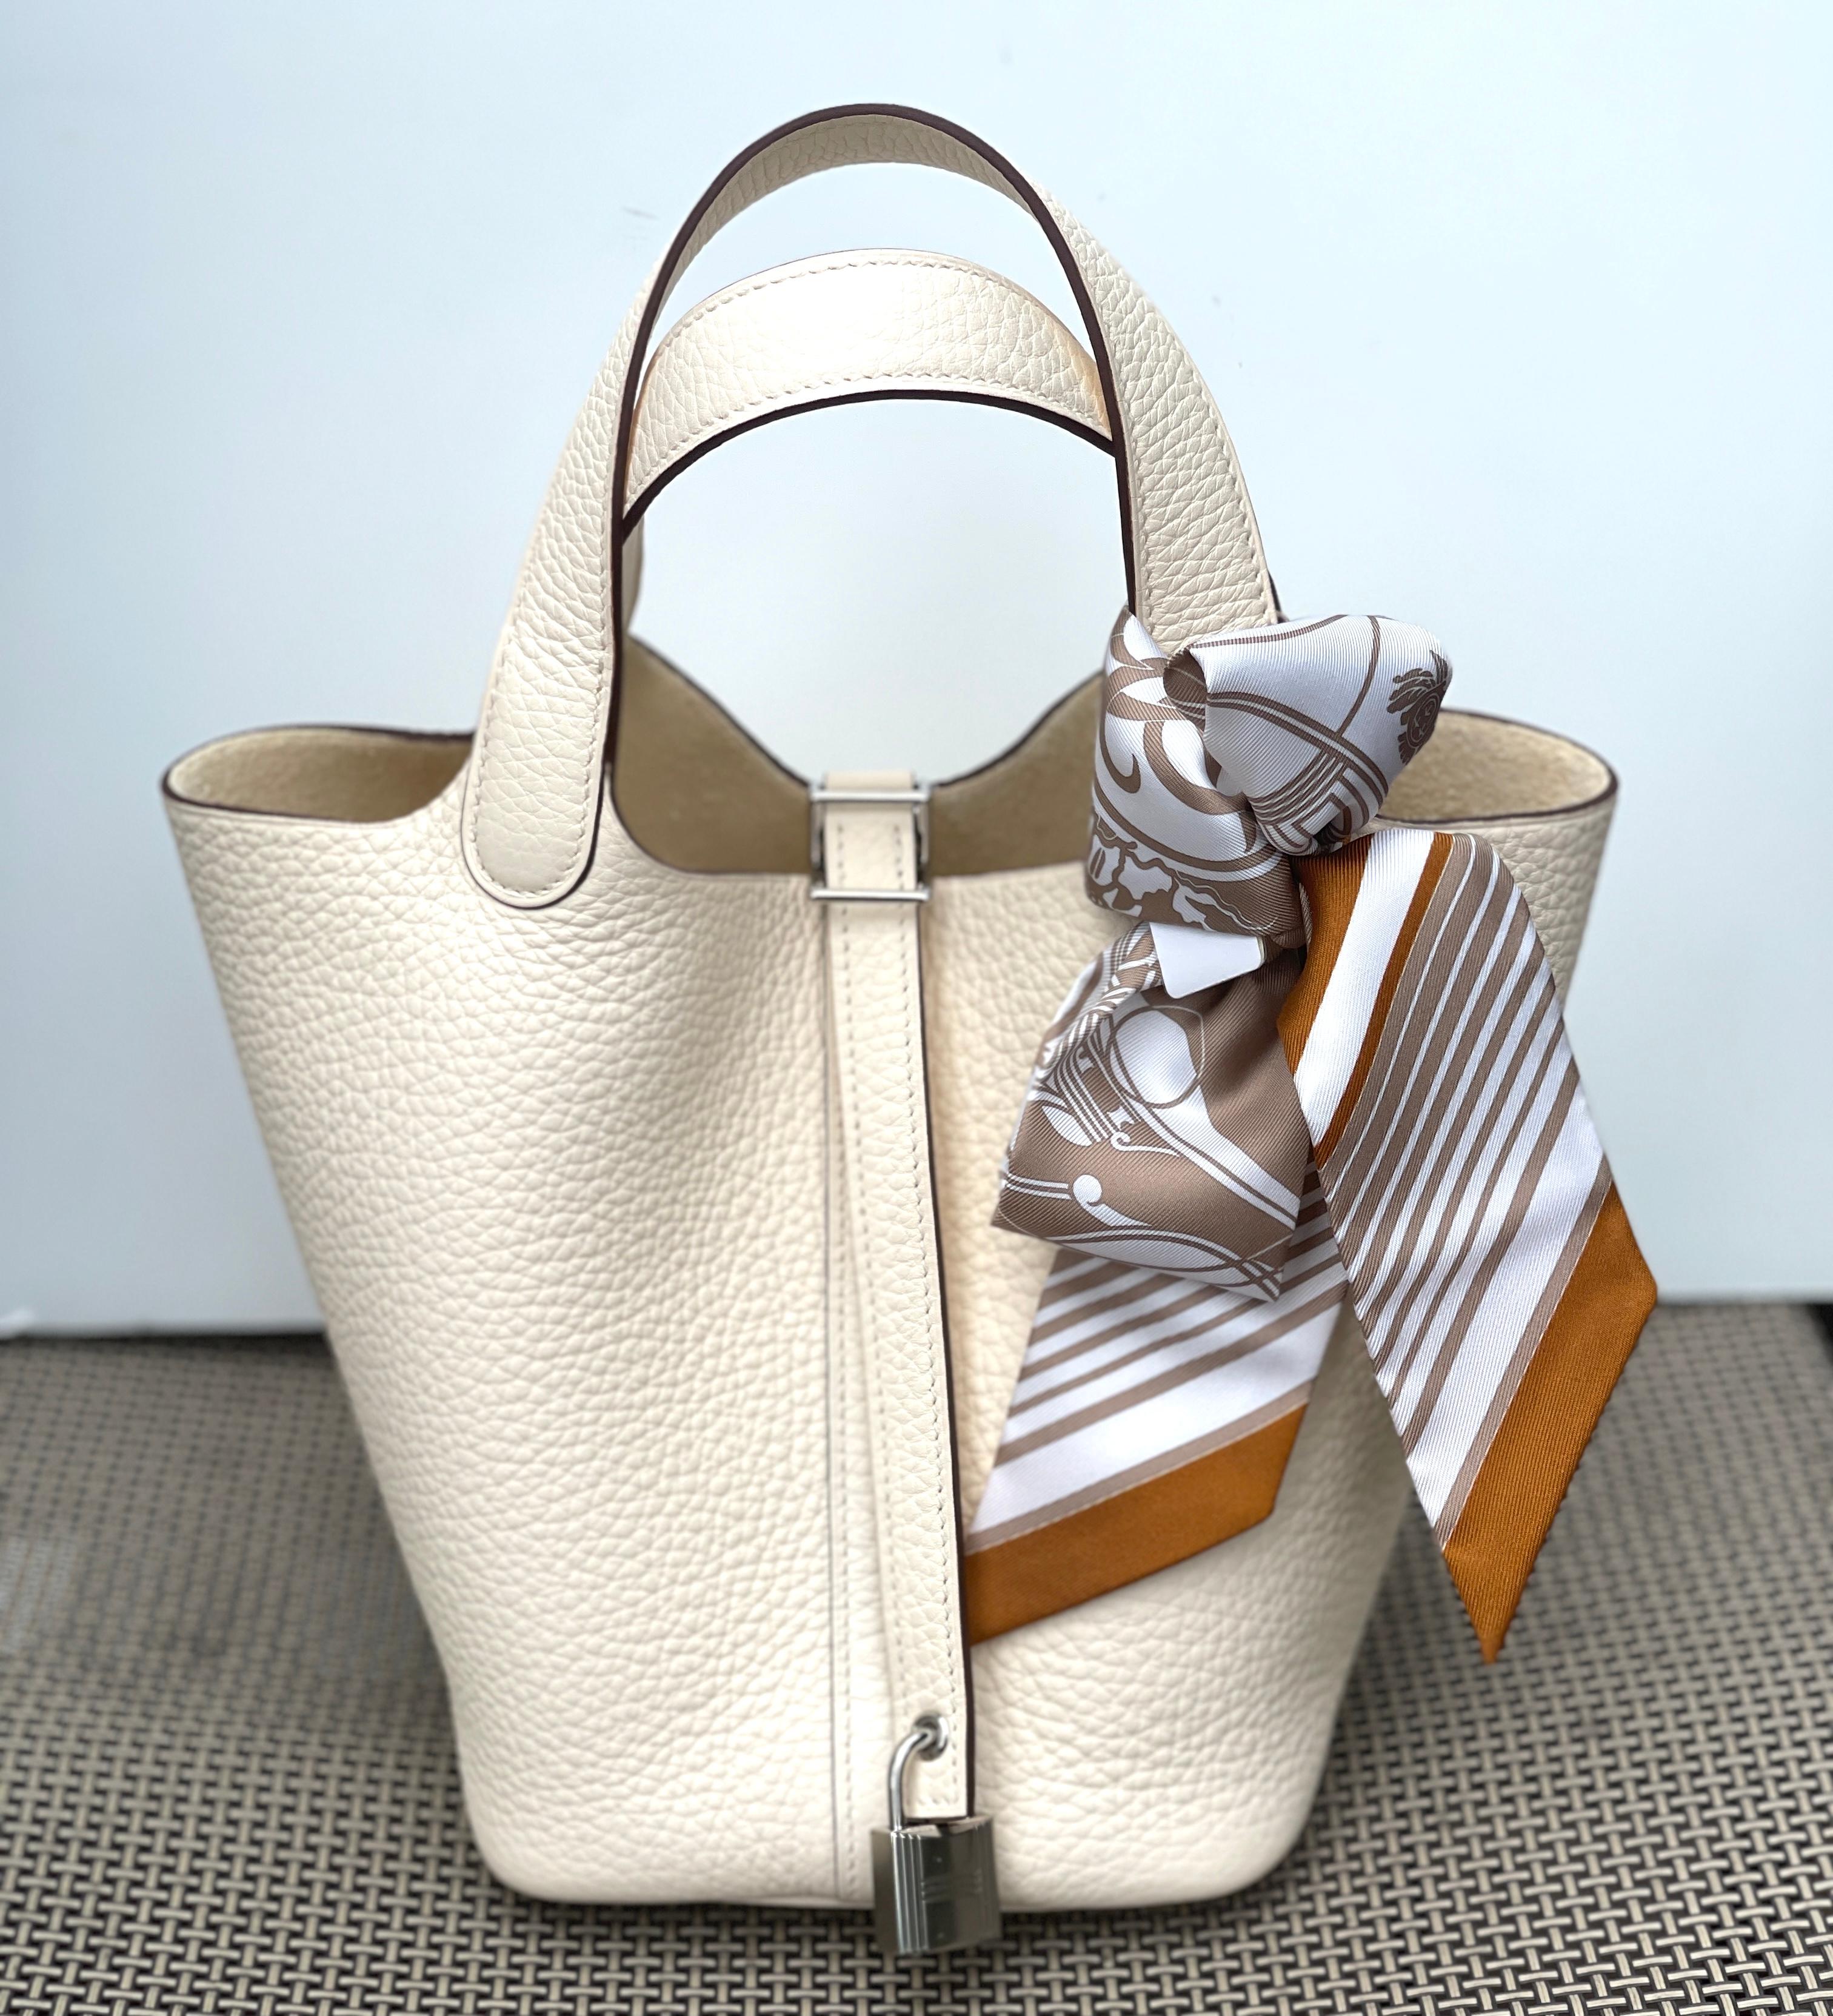 Hermes Picotin Lock
18cm Size
This is the small one, the most wanted size 18cm
Nata Clemence with Palladium Hardware
Timeless
Its lining-less, clean-cut leather and plain, flexible handles make it the ultimate bag
Bag in taurillon Clemence leather